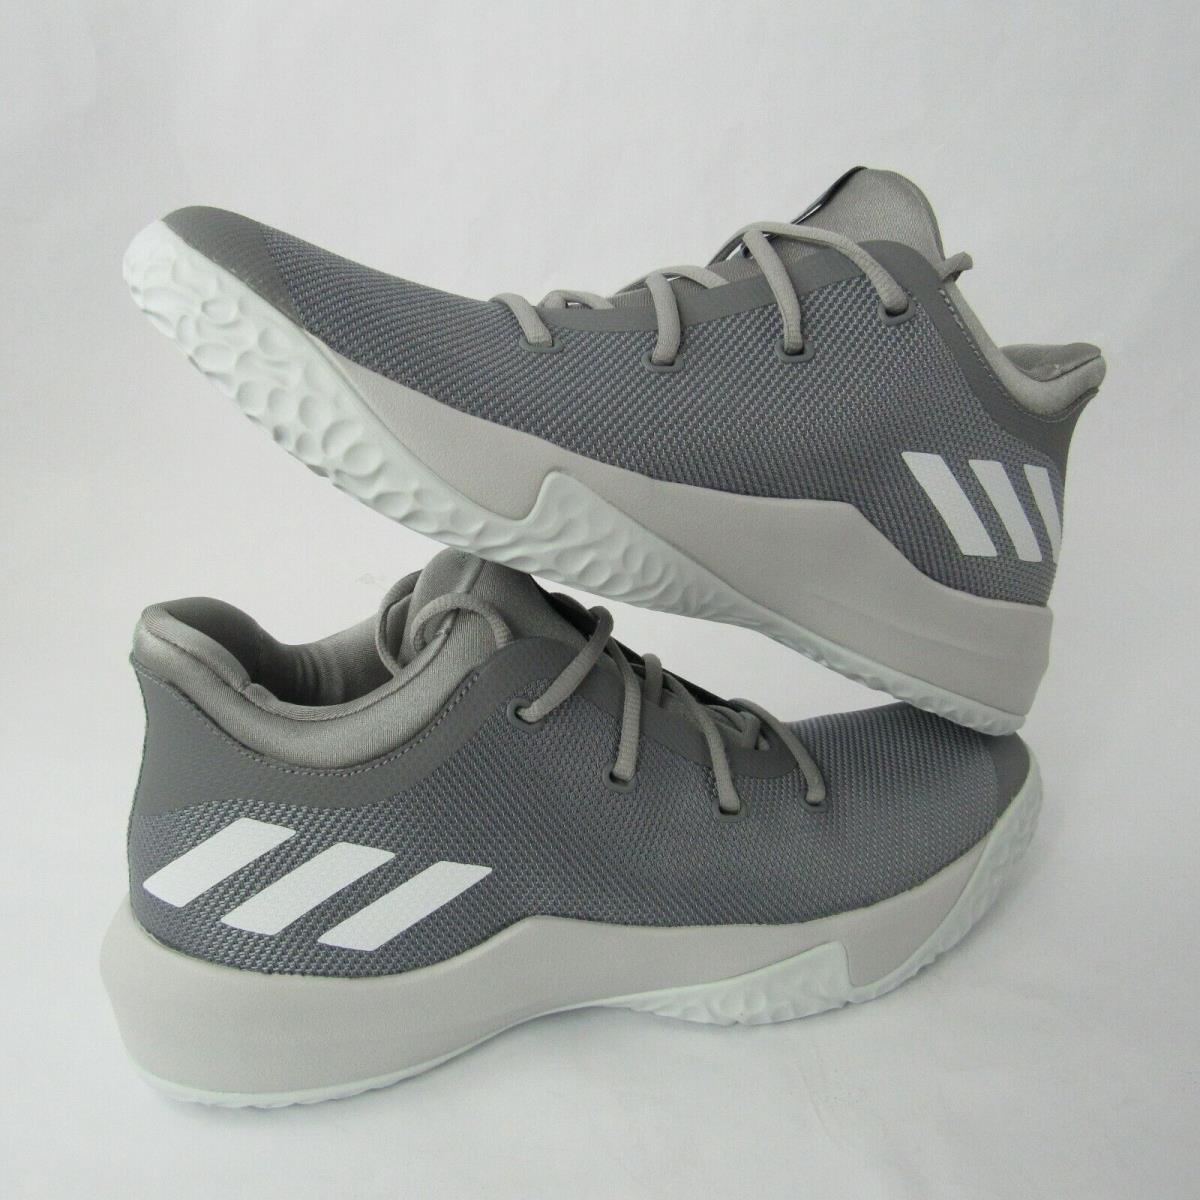 Adidas Rise Up 2 Ankle High Basketball Shoes Gray CQ0557 Size 9 10.5 11.5 | 692740657424 - shoes Rise - Gray SporTipTop